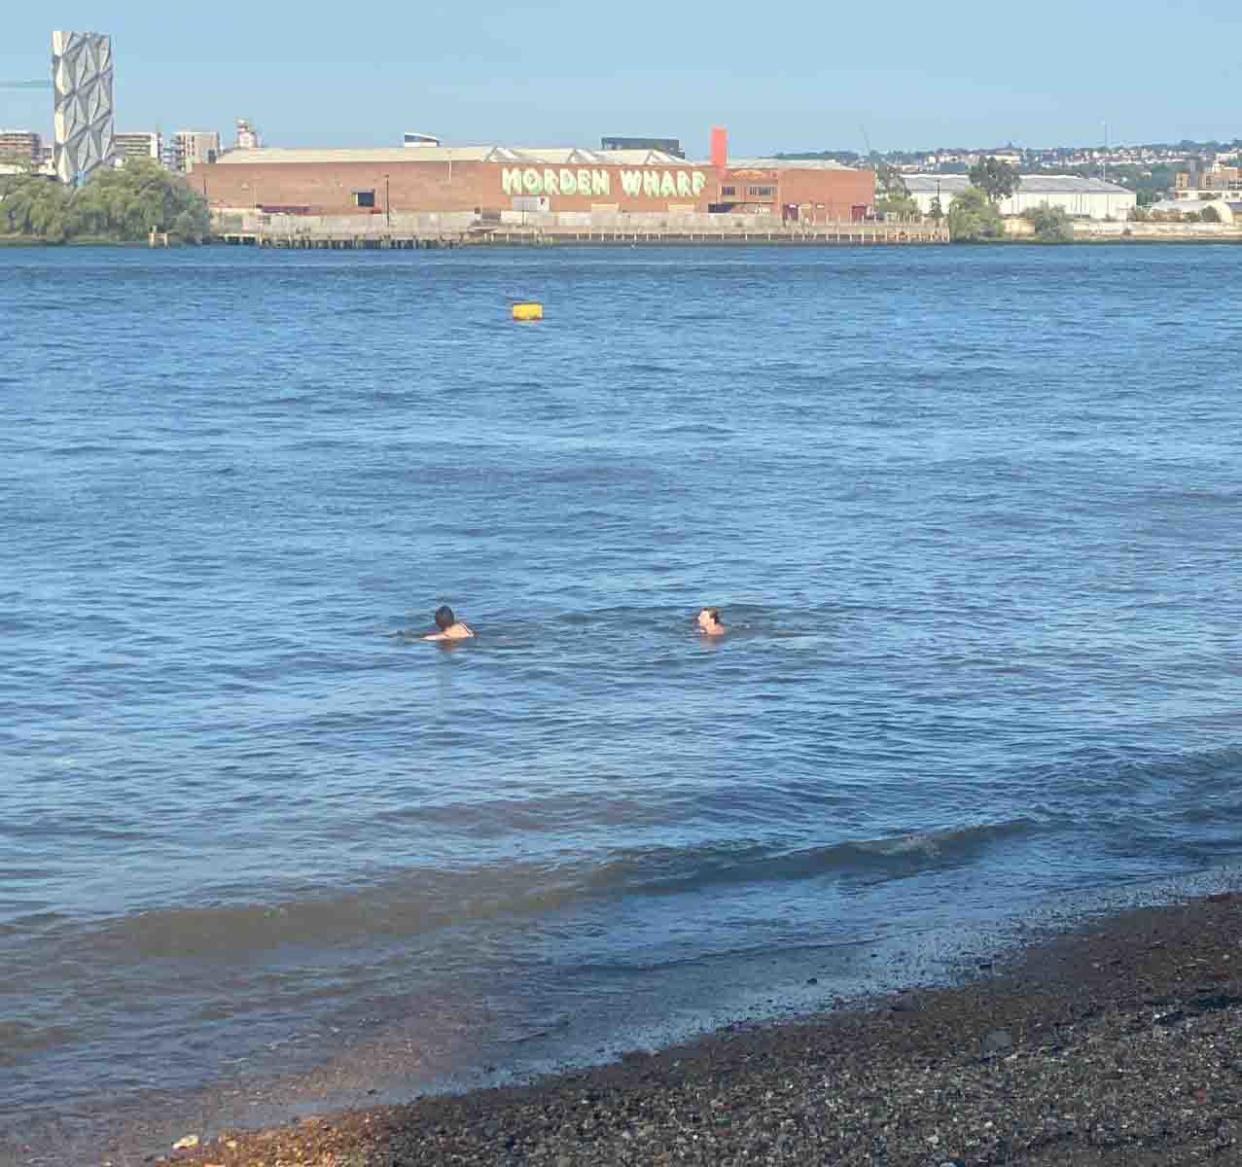 Isle of Dogs residents in London screamed at two women swimming in the Thames on Sunday, fearing for their safety. (Reach)